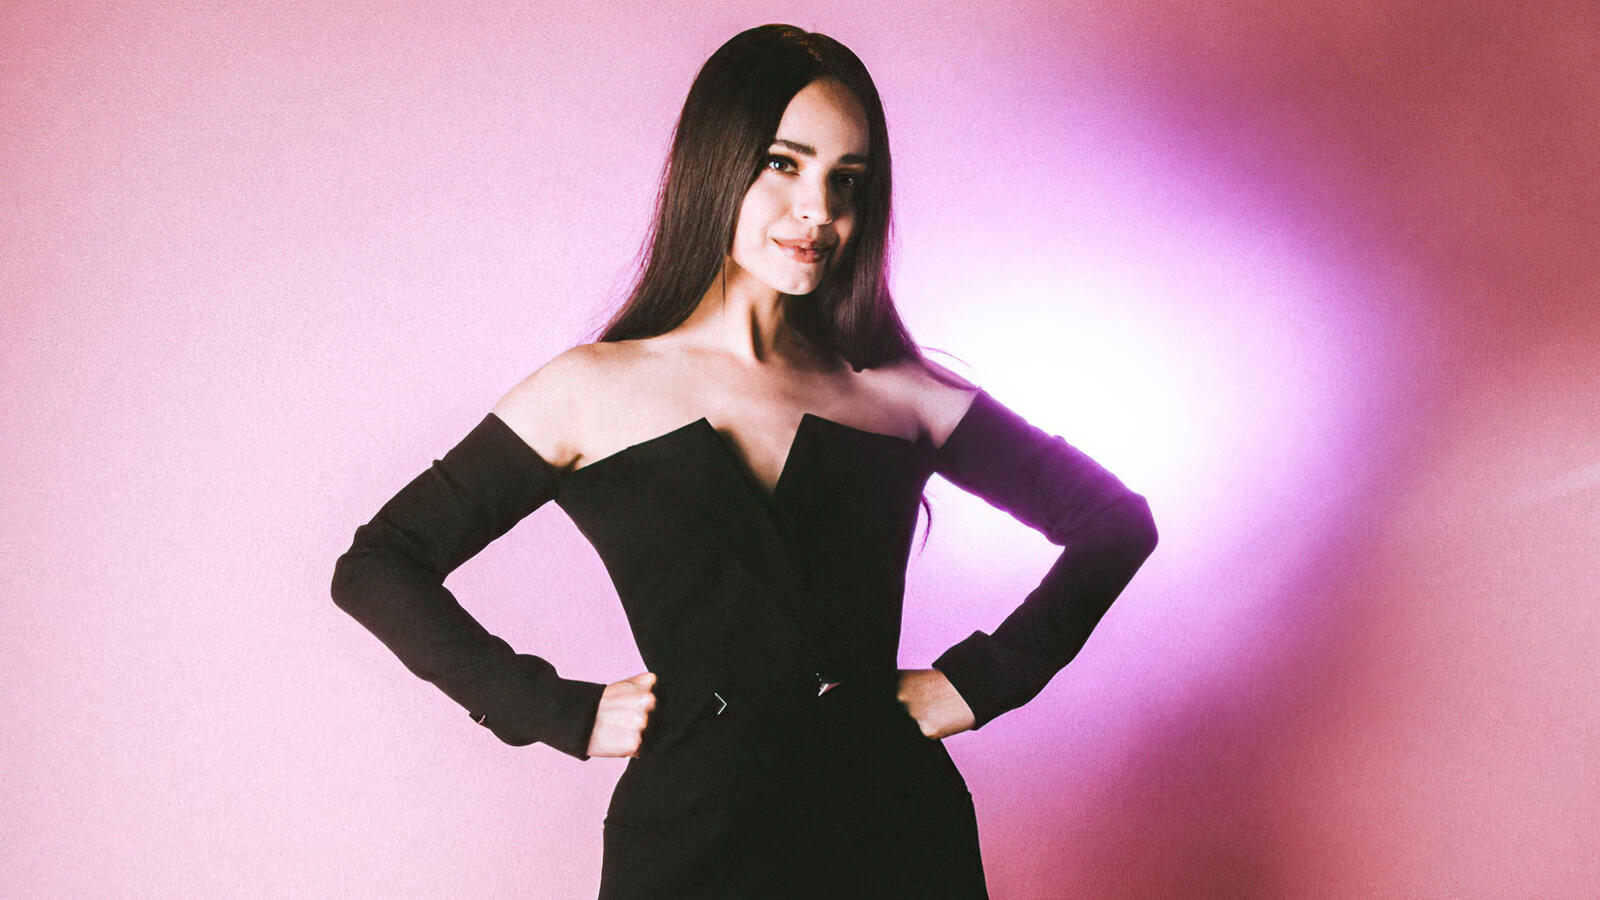 Wallpapers sofia carson grin music on the desktop